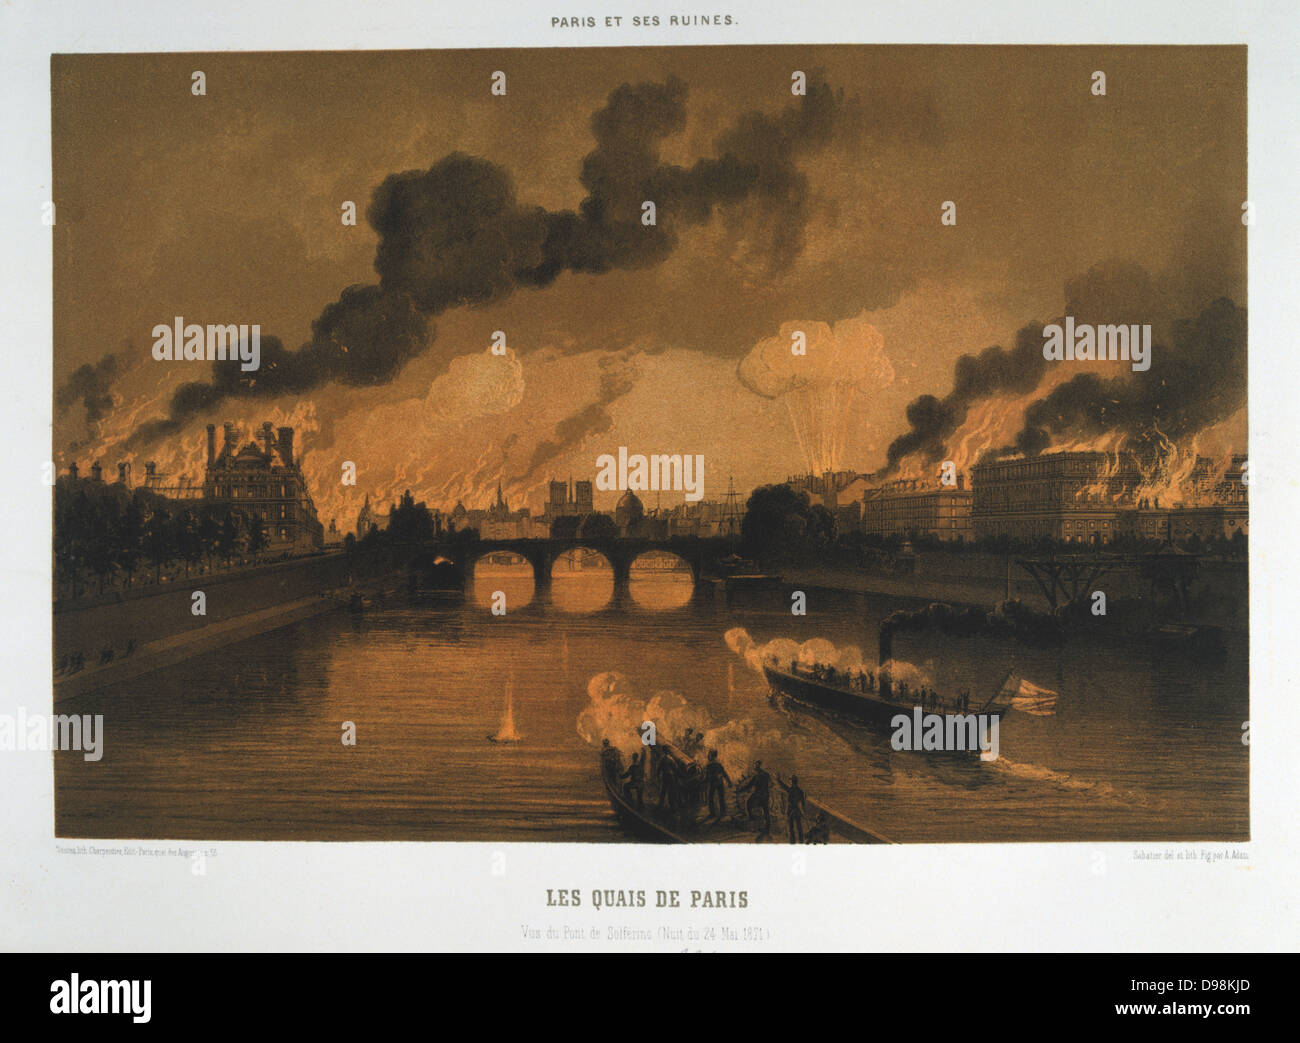 Paris Commune 26 March-28 May 1871. The Bloody Week: The Quays of Paris, view of the Pont Solferino on the night of 24 May, Paris in flames. Lithograph. Stock Photo